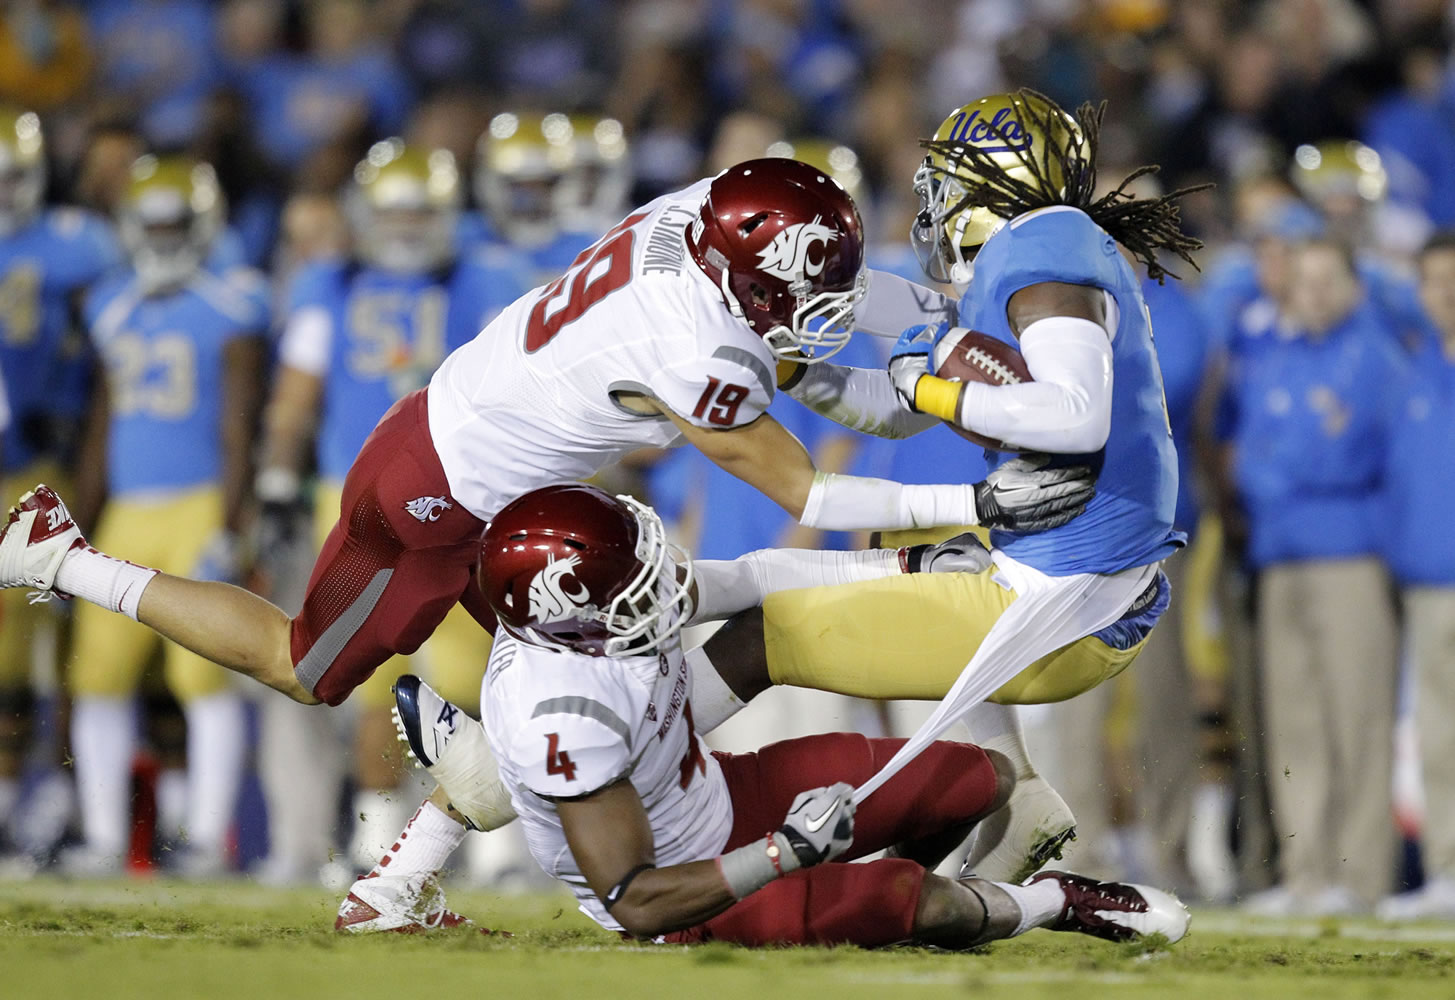 UCLA wide receiver Josh Smith, right, is tackled by Washington State safety Jordan Simone (19) and safety Anthony Carpenter (4) during the first half Saturday.